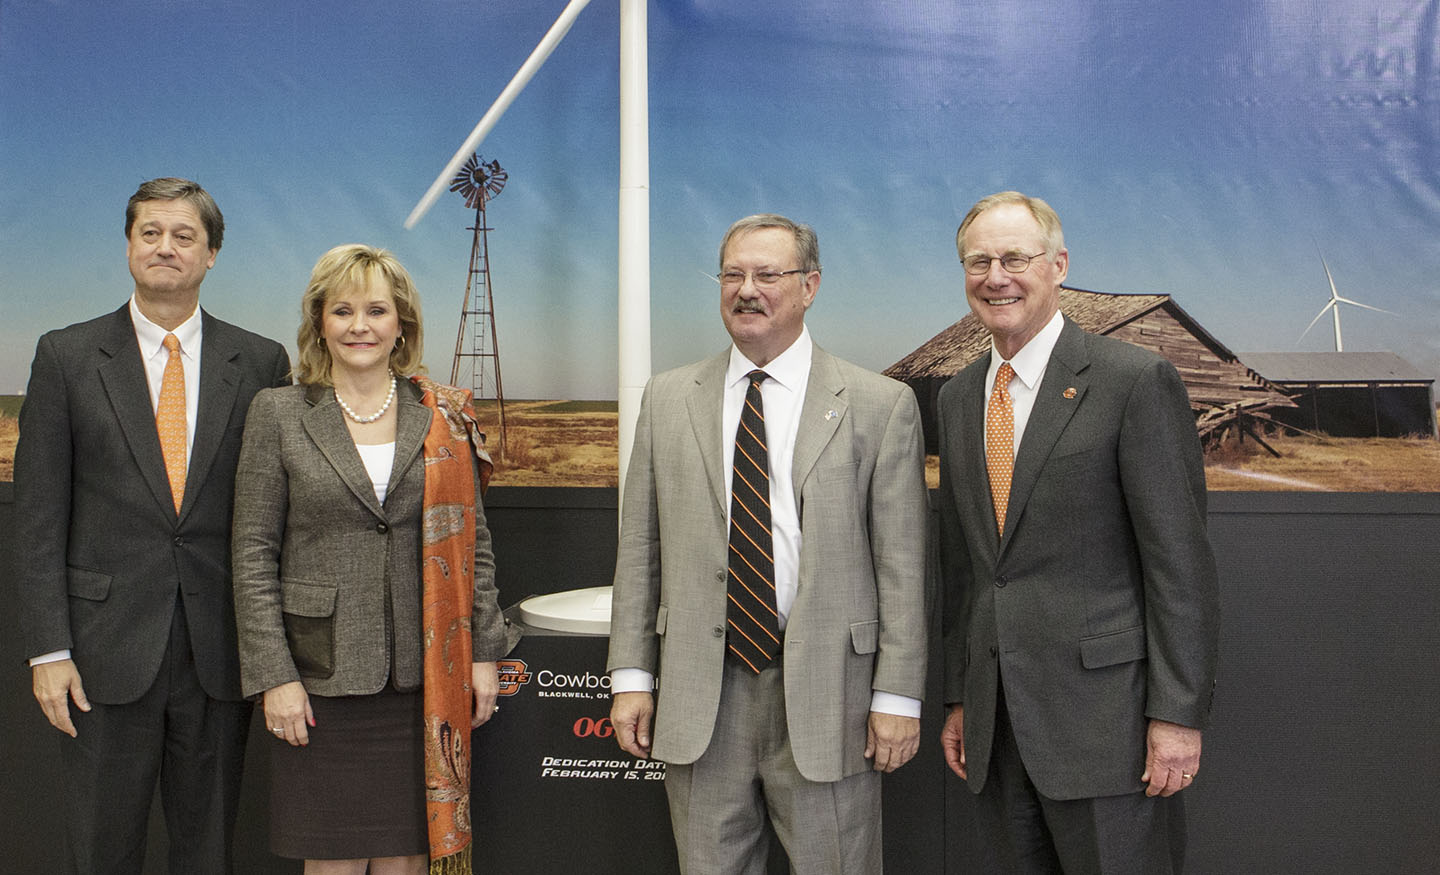 Governor Mary Fallin is joined by (from left to right) OGE Energy Corp. Chairman, CEO and President Pete Delaney, Blackwell Industrial Authority trustee Mike Loftis and OSU President Burns Hargis at the dedication of the OSU Cowboy Wind Farm held Friday, Feb. 15 on the campus of OSU-Stillwater. The windfarm, located near Blackwell, Okla., is the result of a 20-year agreement between OSU and OG&E. OSU now receives a majority of its electricity from wind generation.